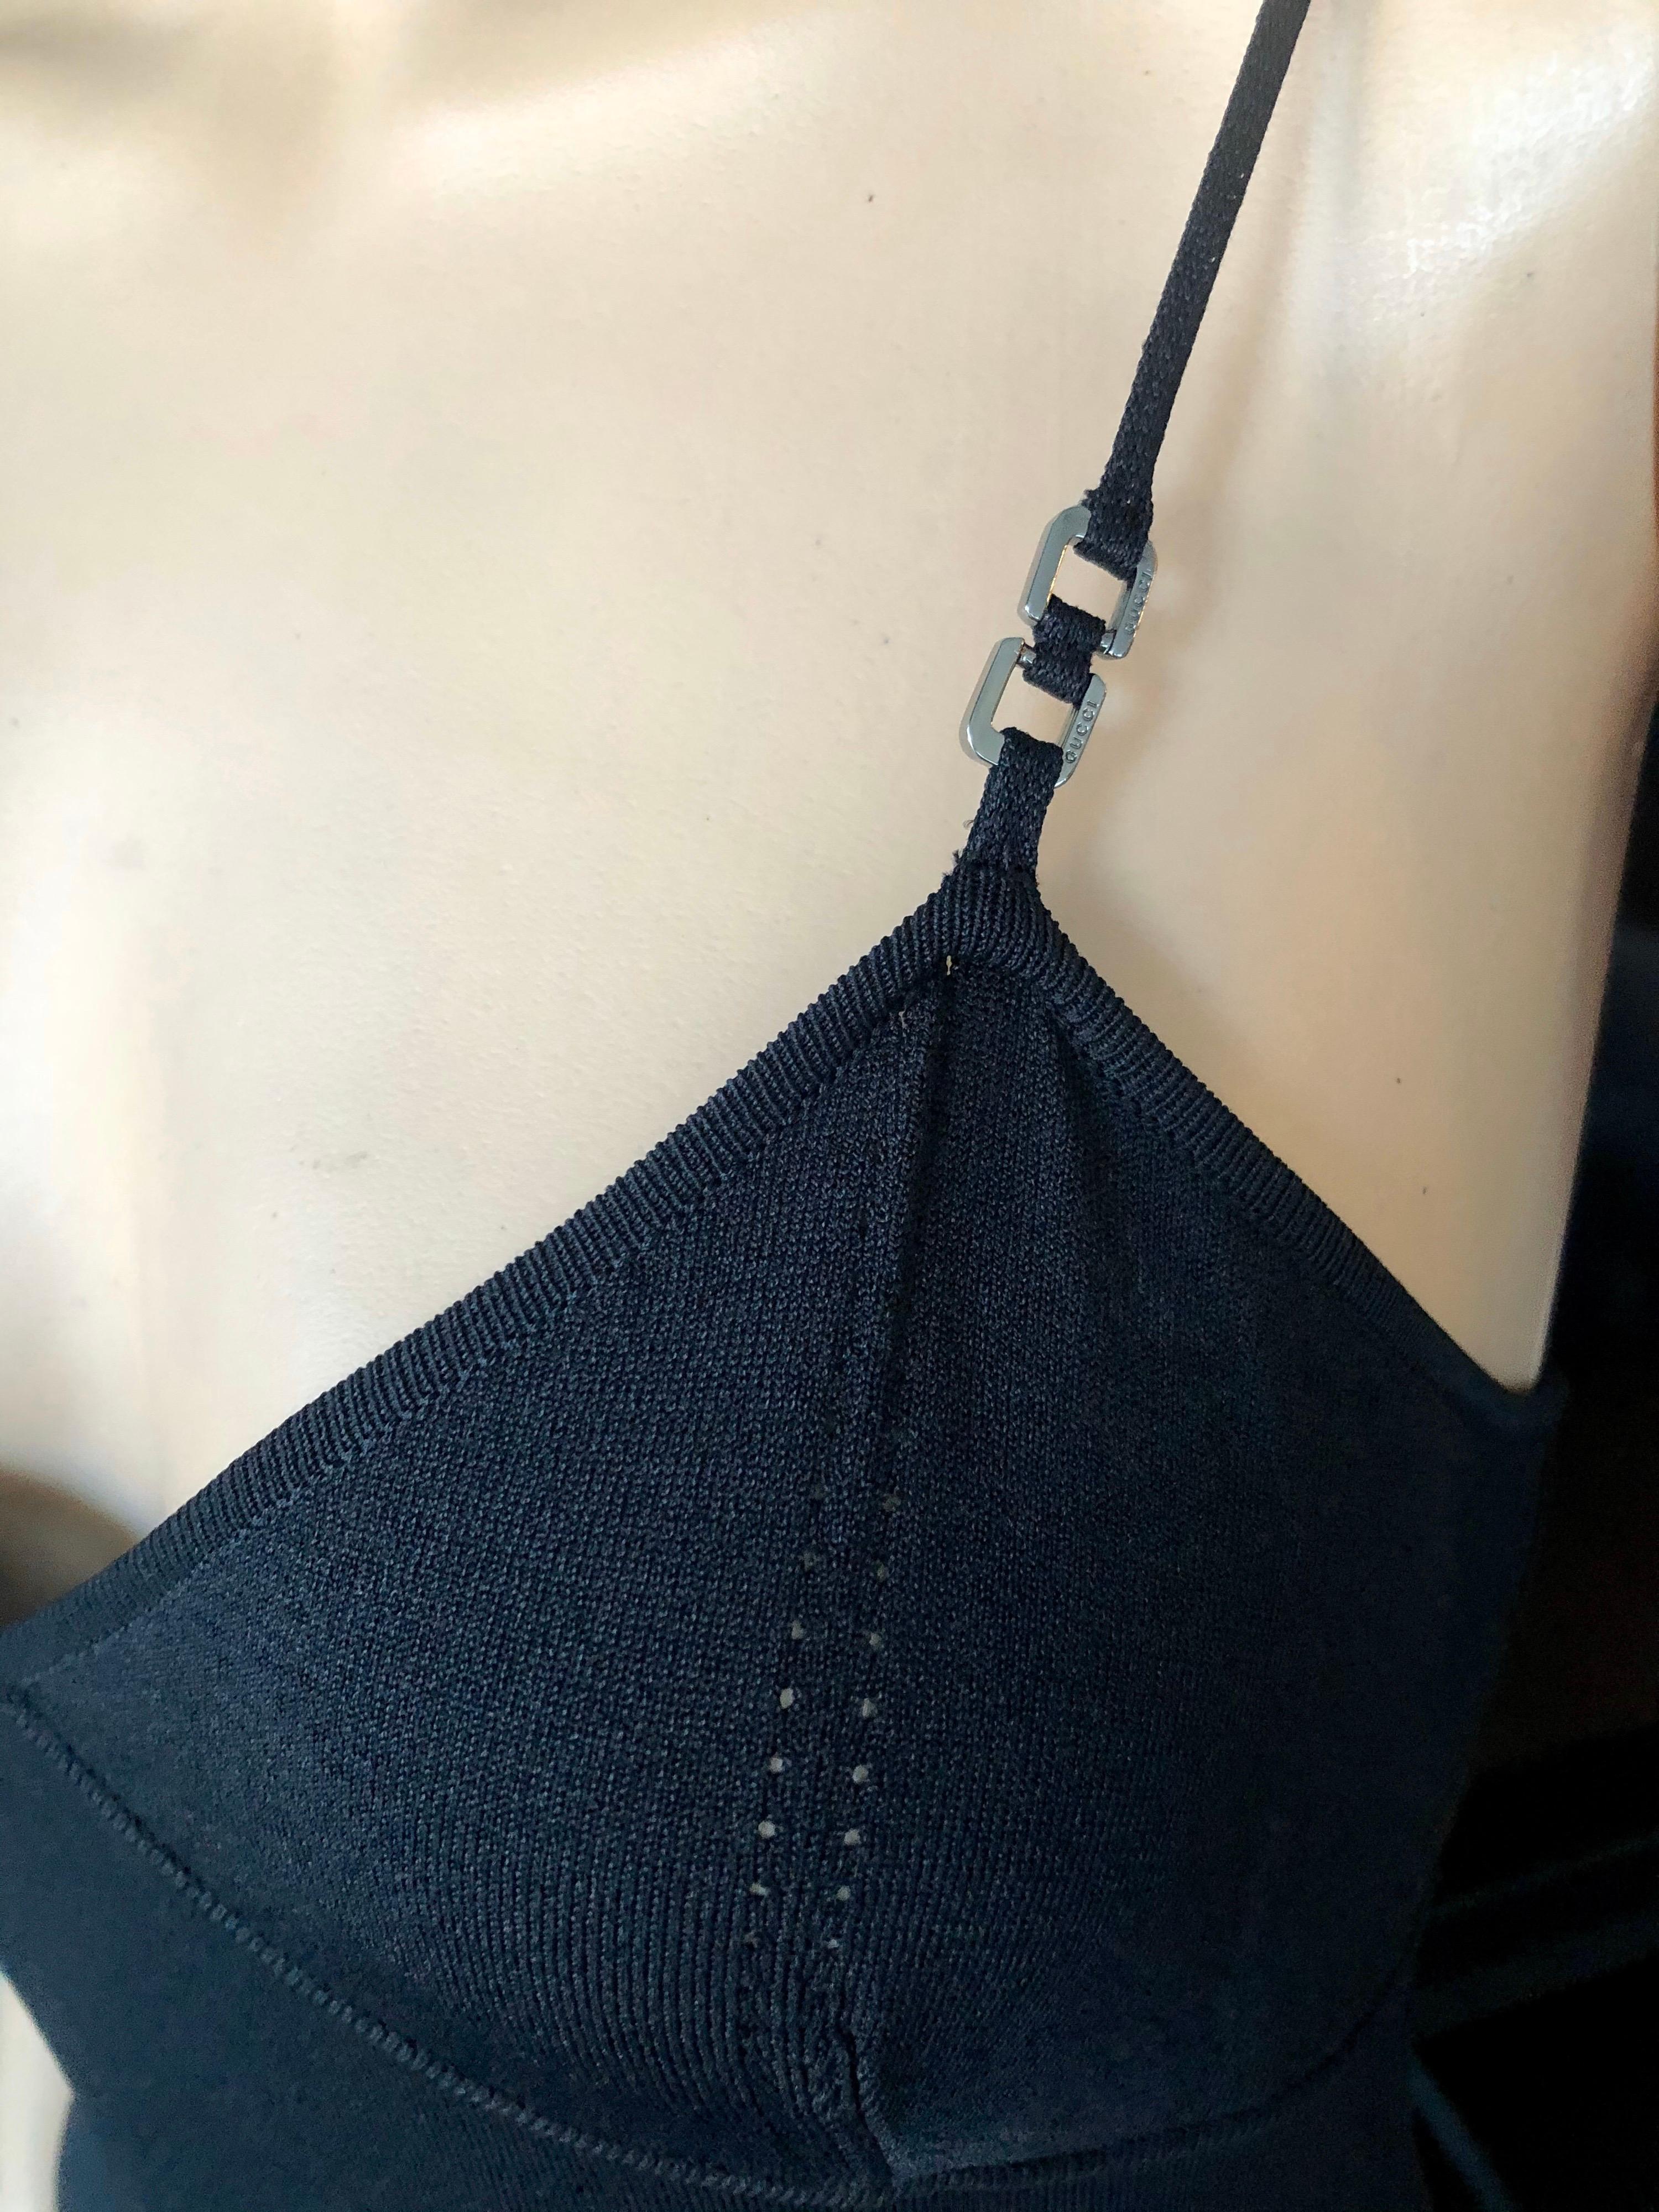 Tom Ford for Gucci S/S 1999 Knit Bodycon Black Dress  In Excellent Condition For Sale In Naples, FL